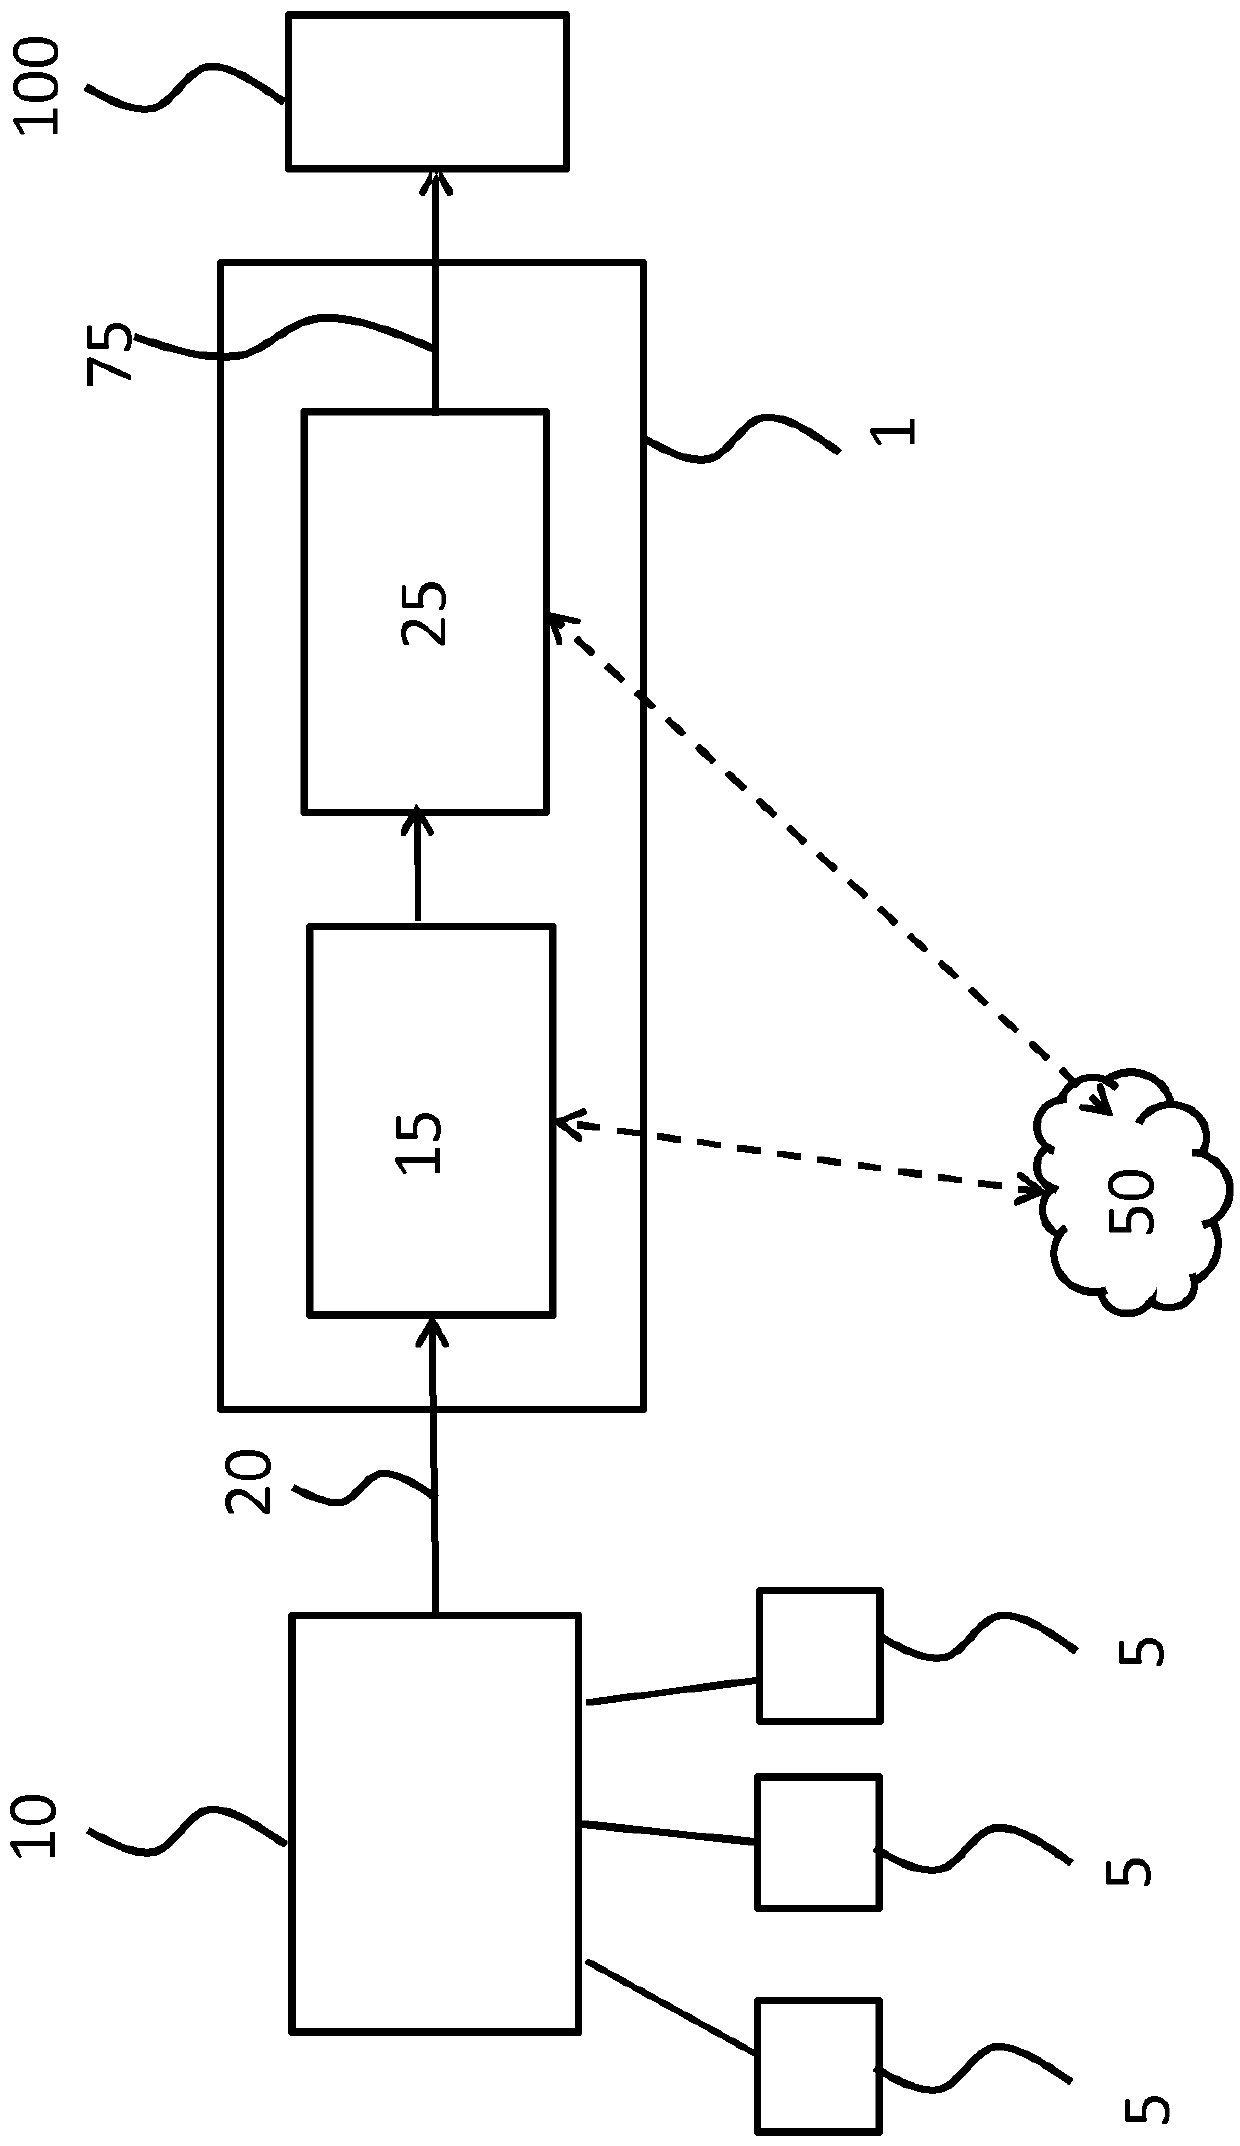 System and method for monitoring activities of daily living of person